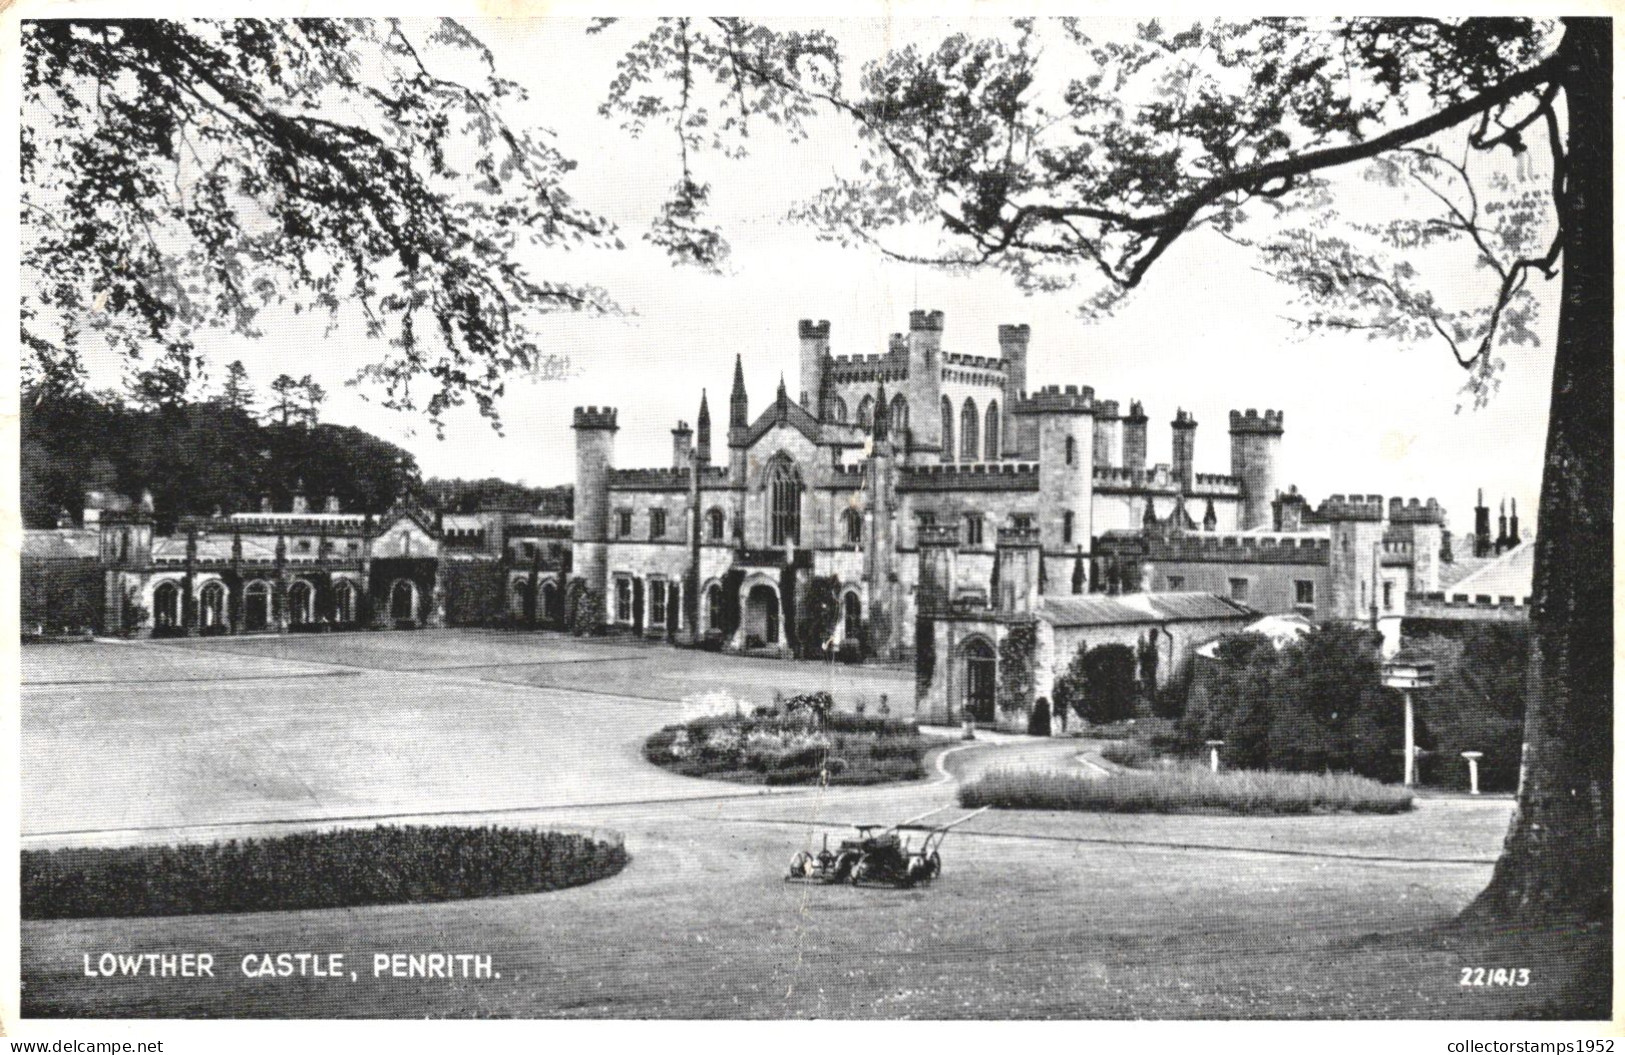 PENRITH, CUMBERLAND, LOWTHER CASTLE, ARCHITECTURE, PARK, ENGLAND, UNITED KINGDOM, POSTCARD - Penrith